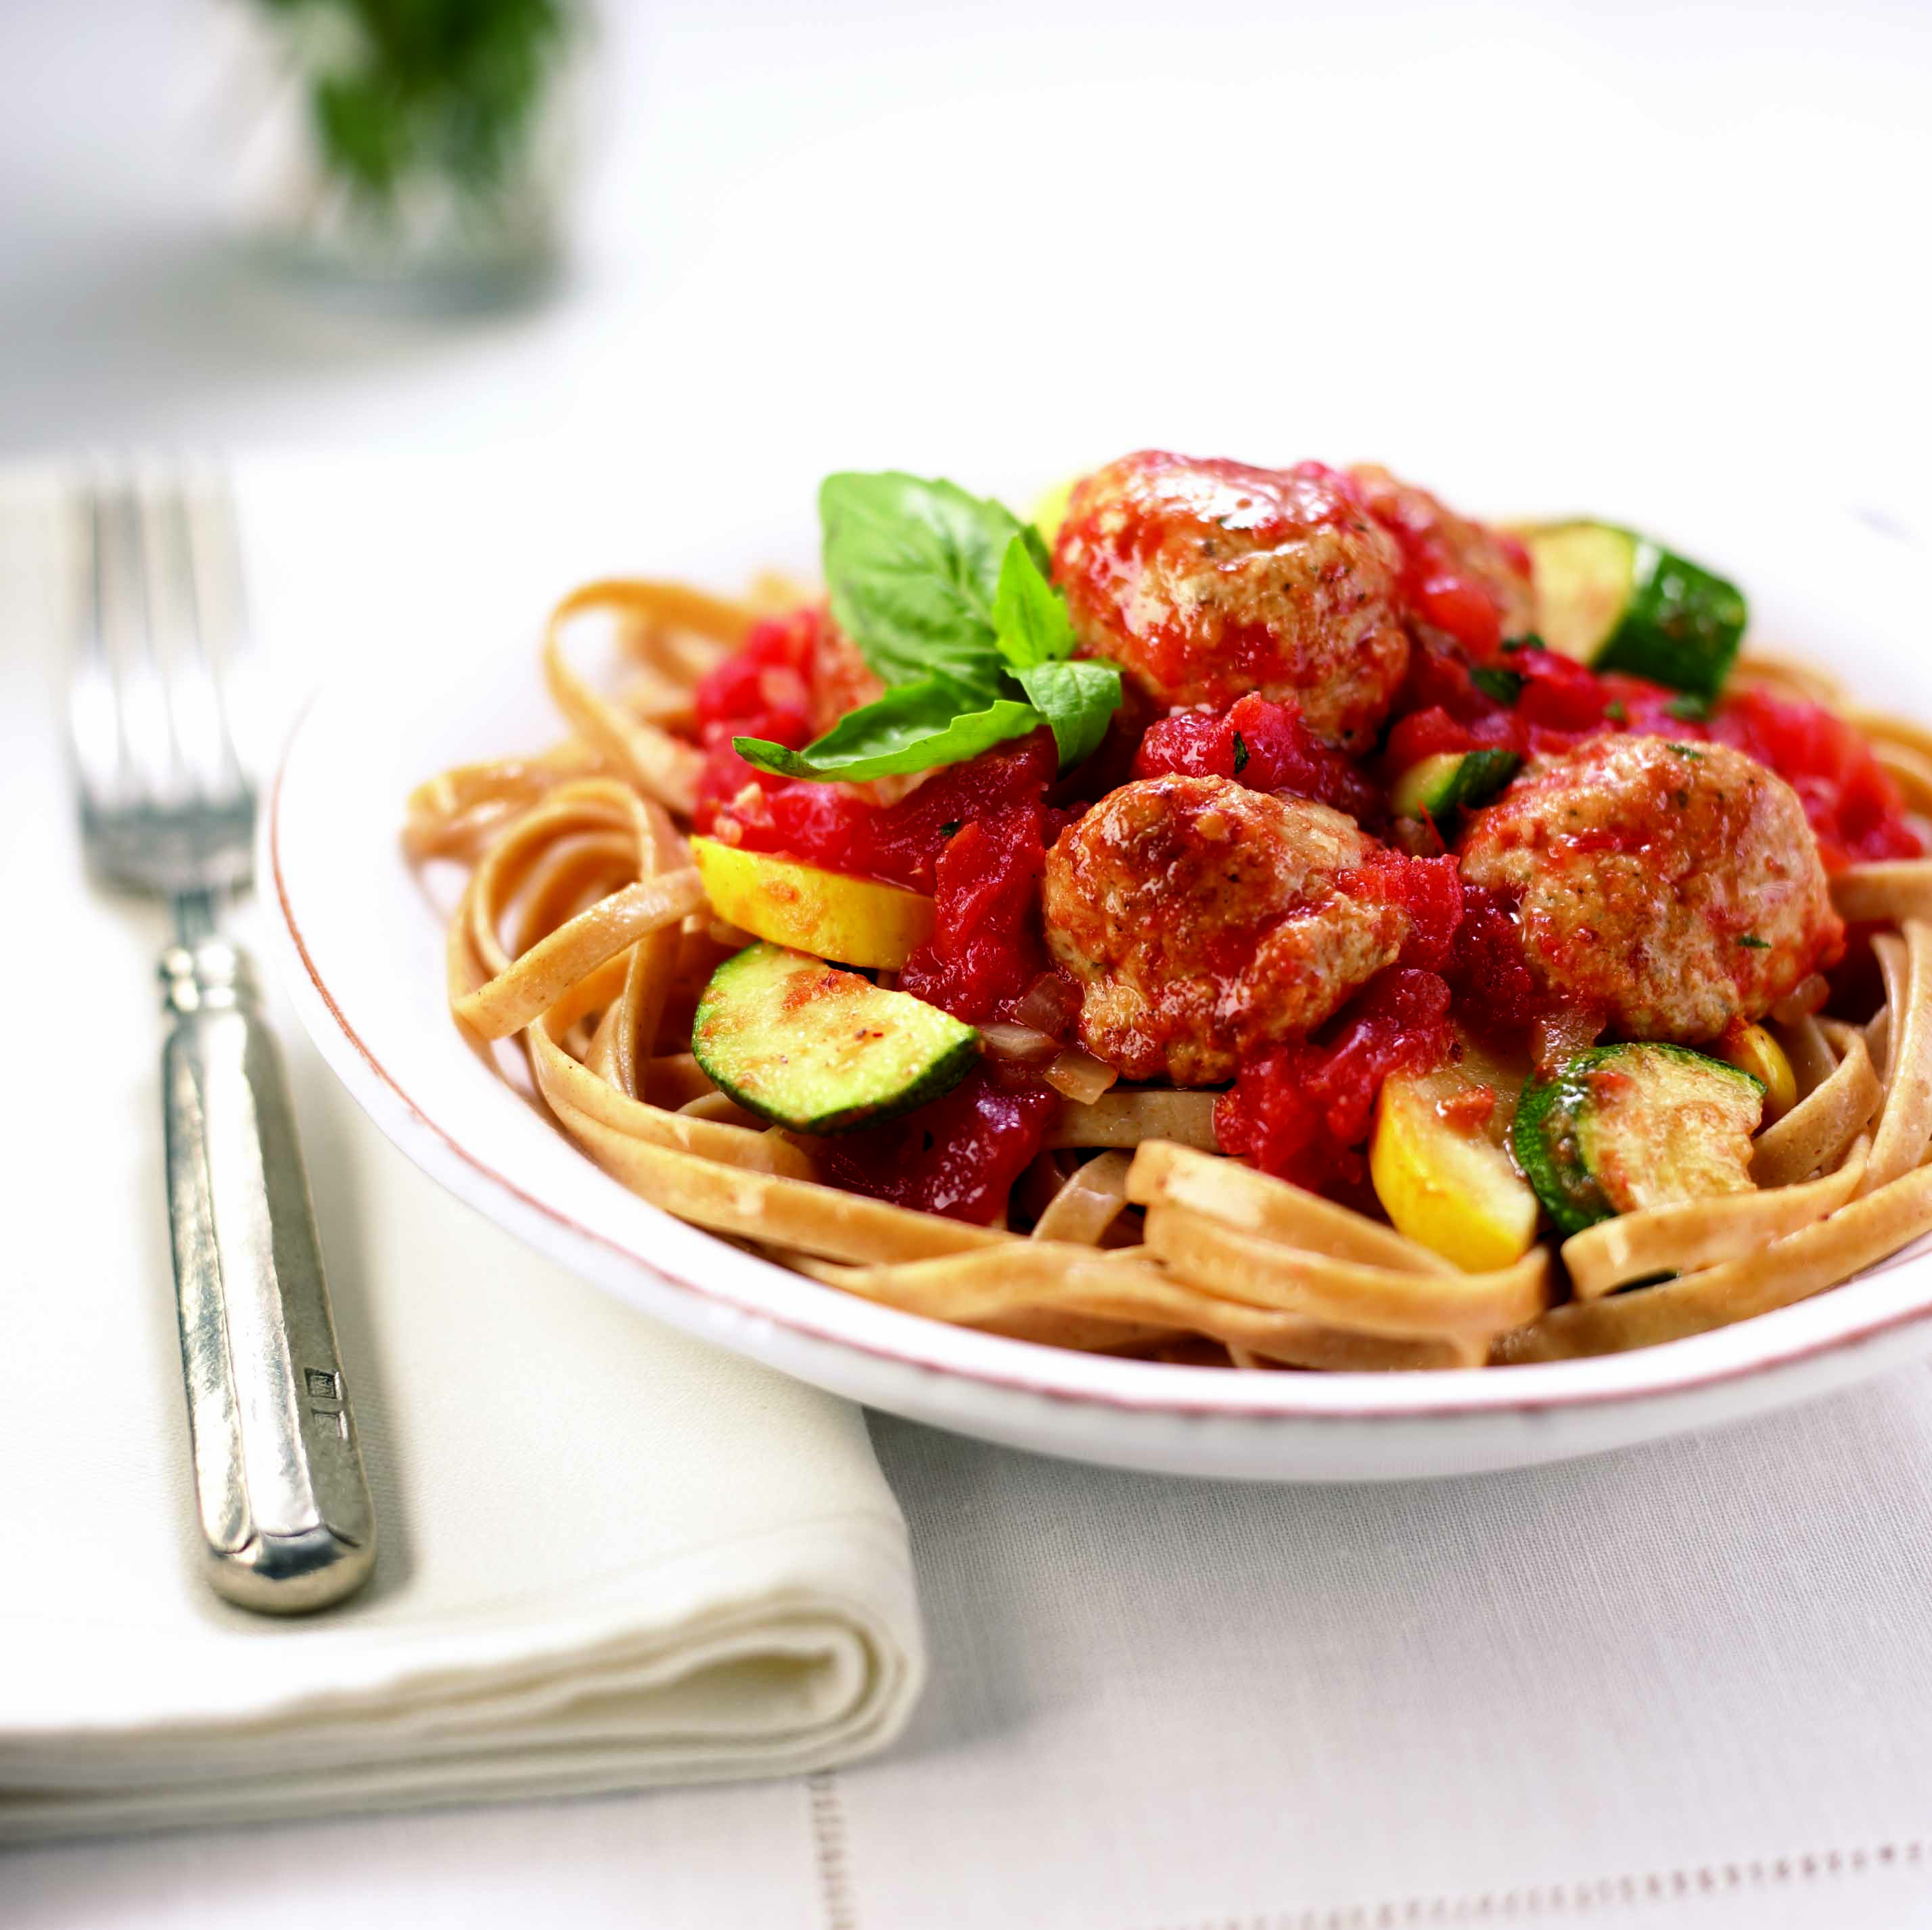 Meatballs with zucchini, squash and tomato sauce served over whole wheat pasta